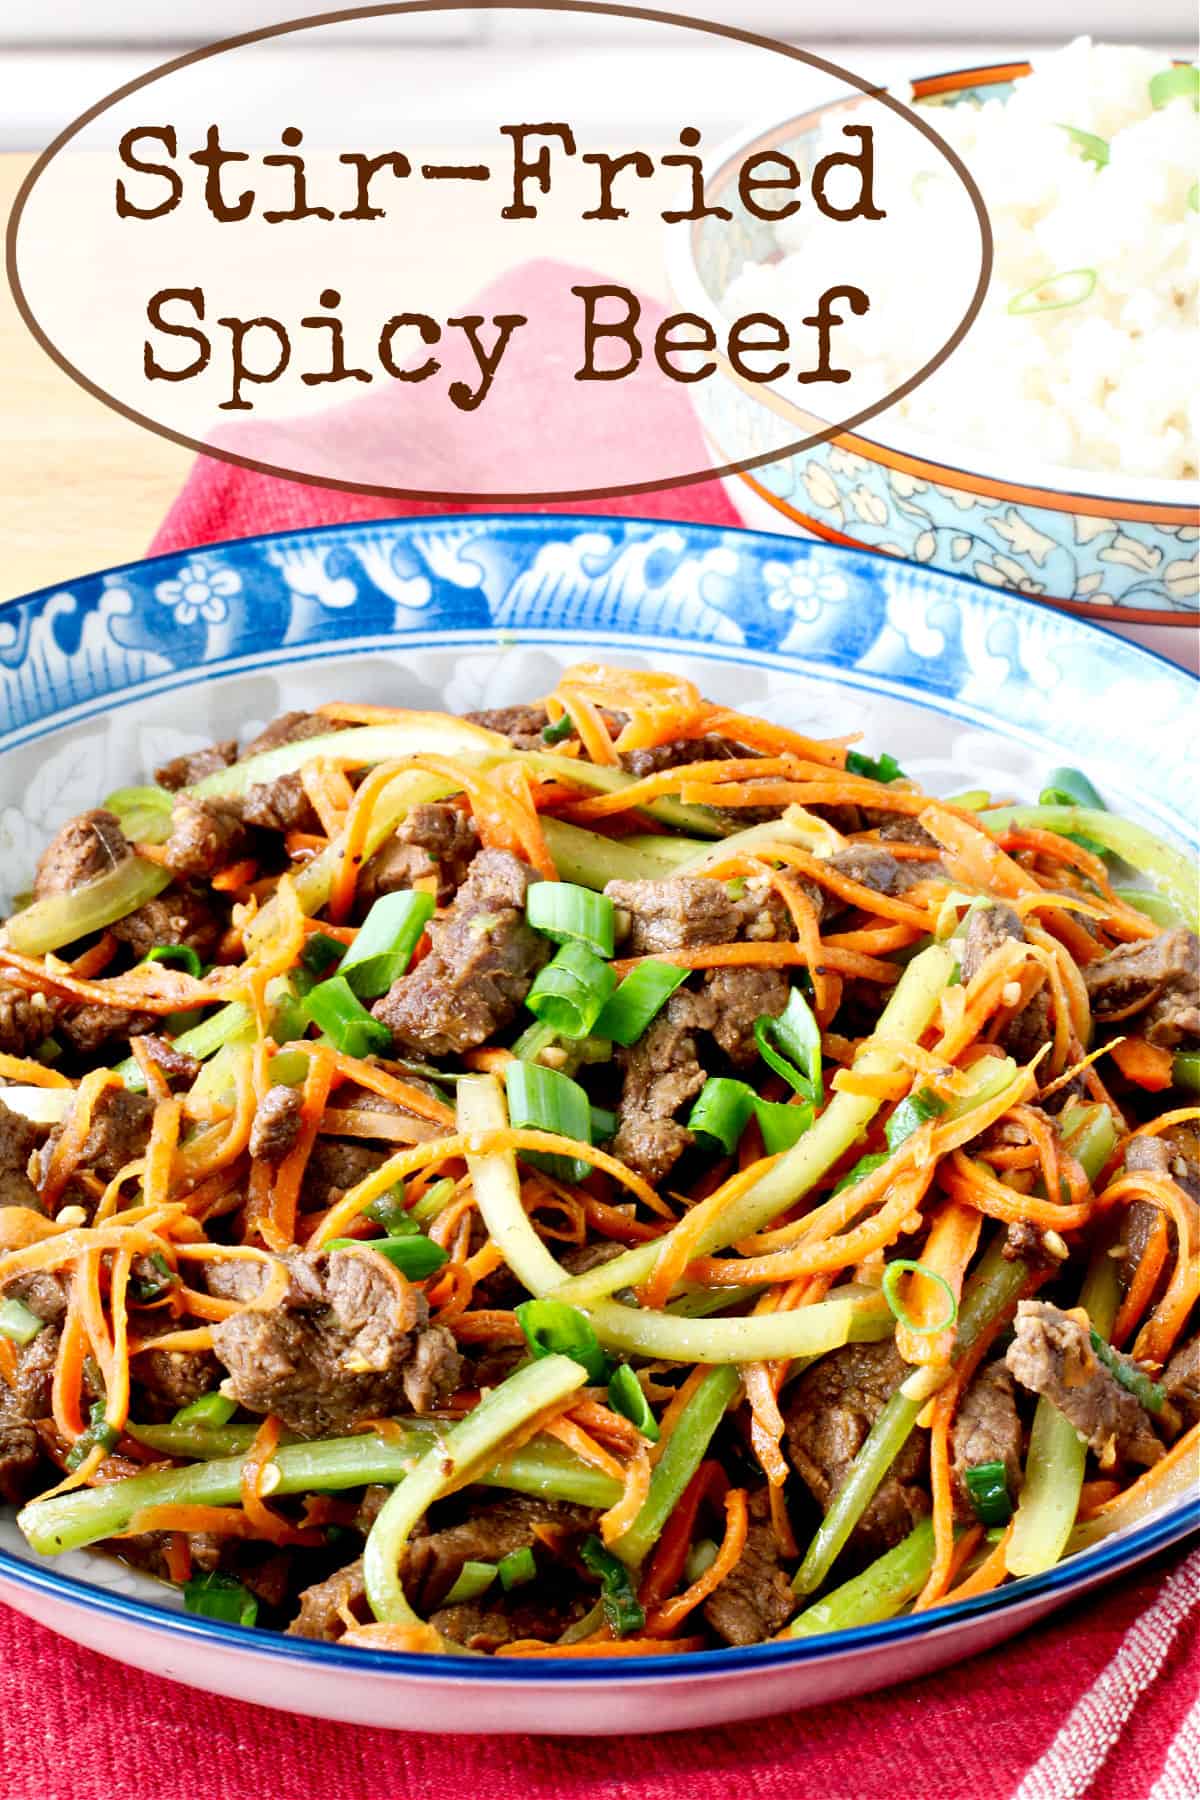 Spicy Stir-Fried Beef in a blue patterned bowl.